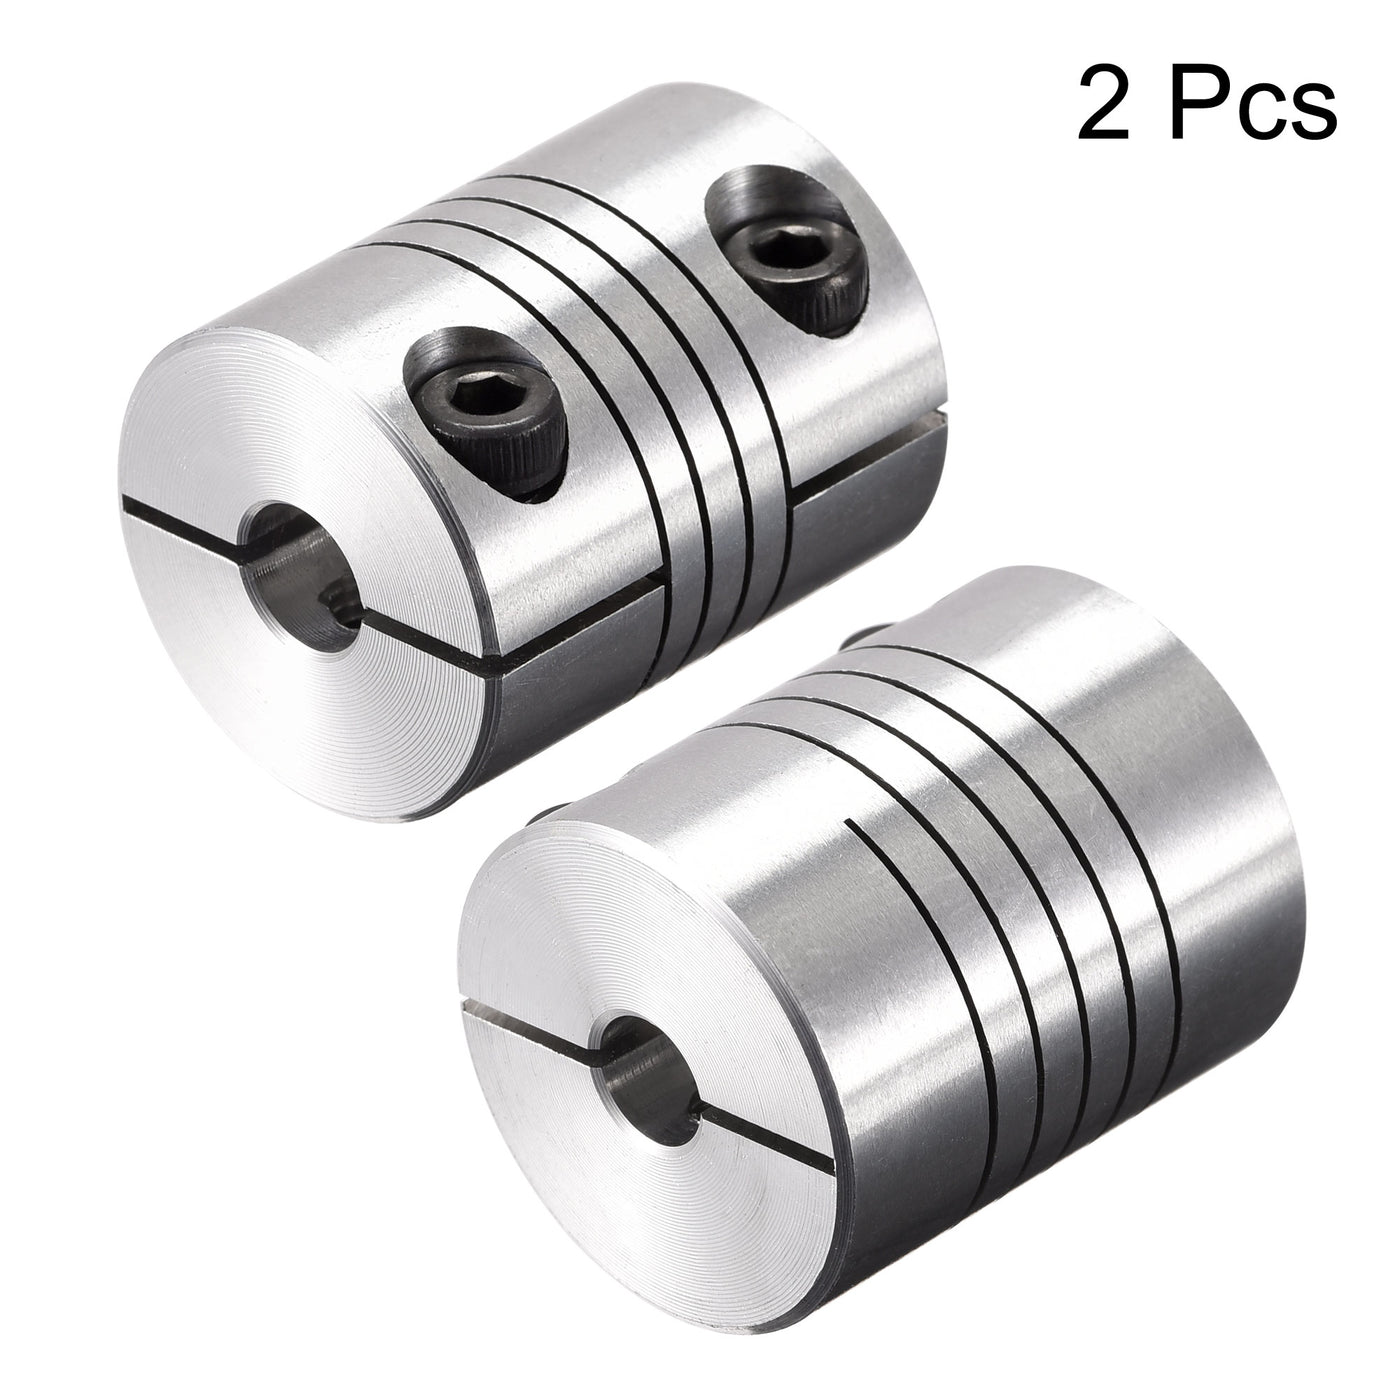 uxcell Uxcell 2PCS Motor Shaft 5mm to 6.35mm Helical Beam Coupler Coupling 20mm Dia 25mm Long